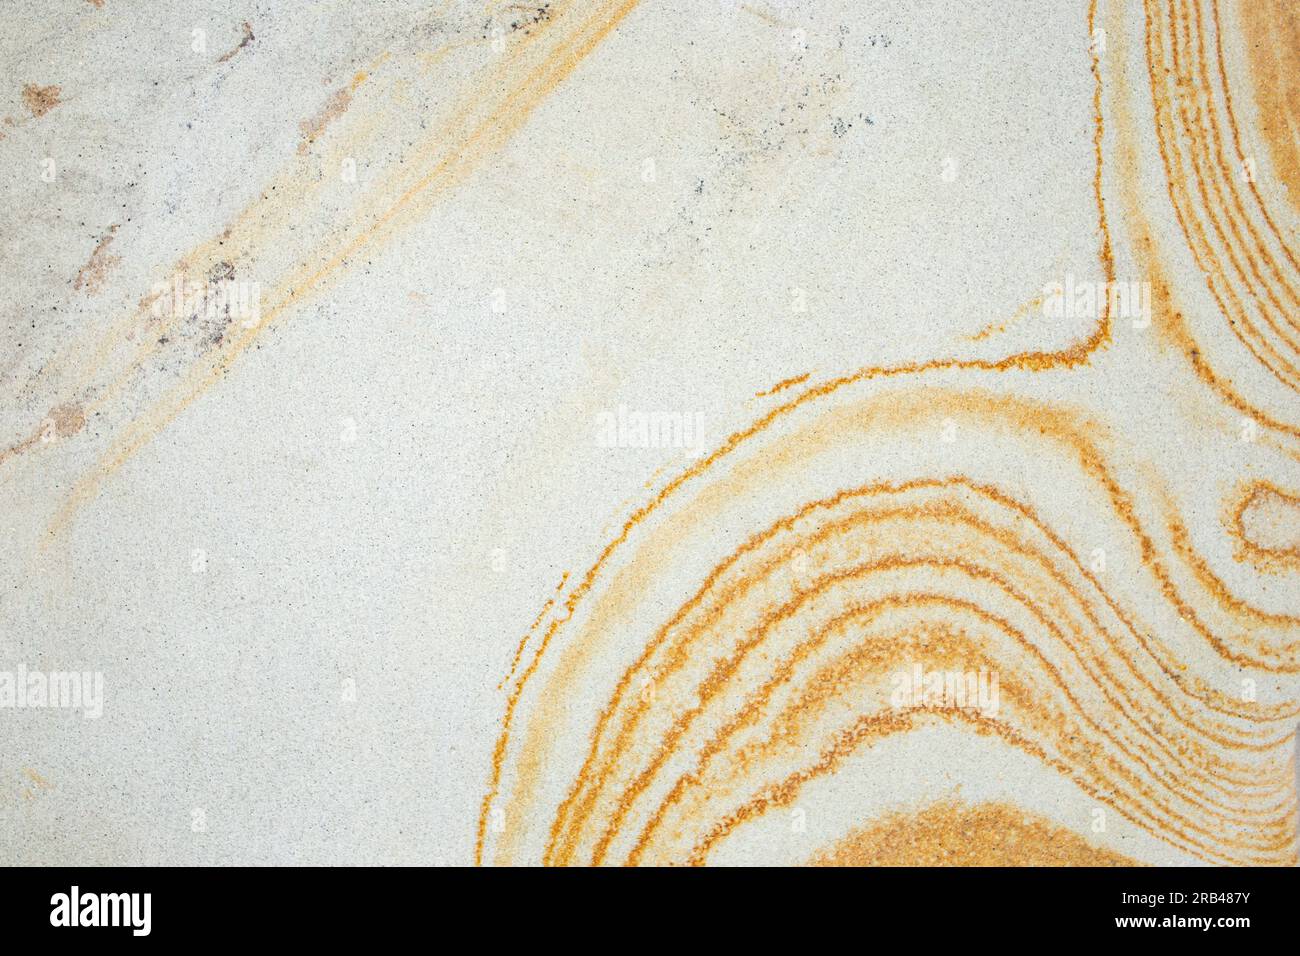 Rusty parallel waves on a sandstone tile, abstract close up texture Stock Photo